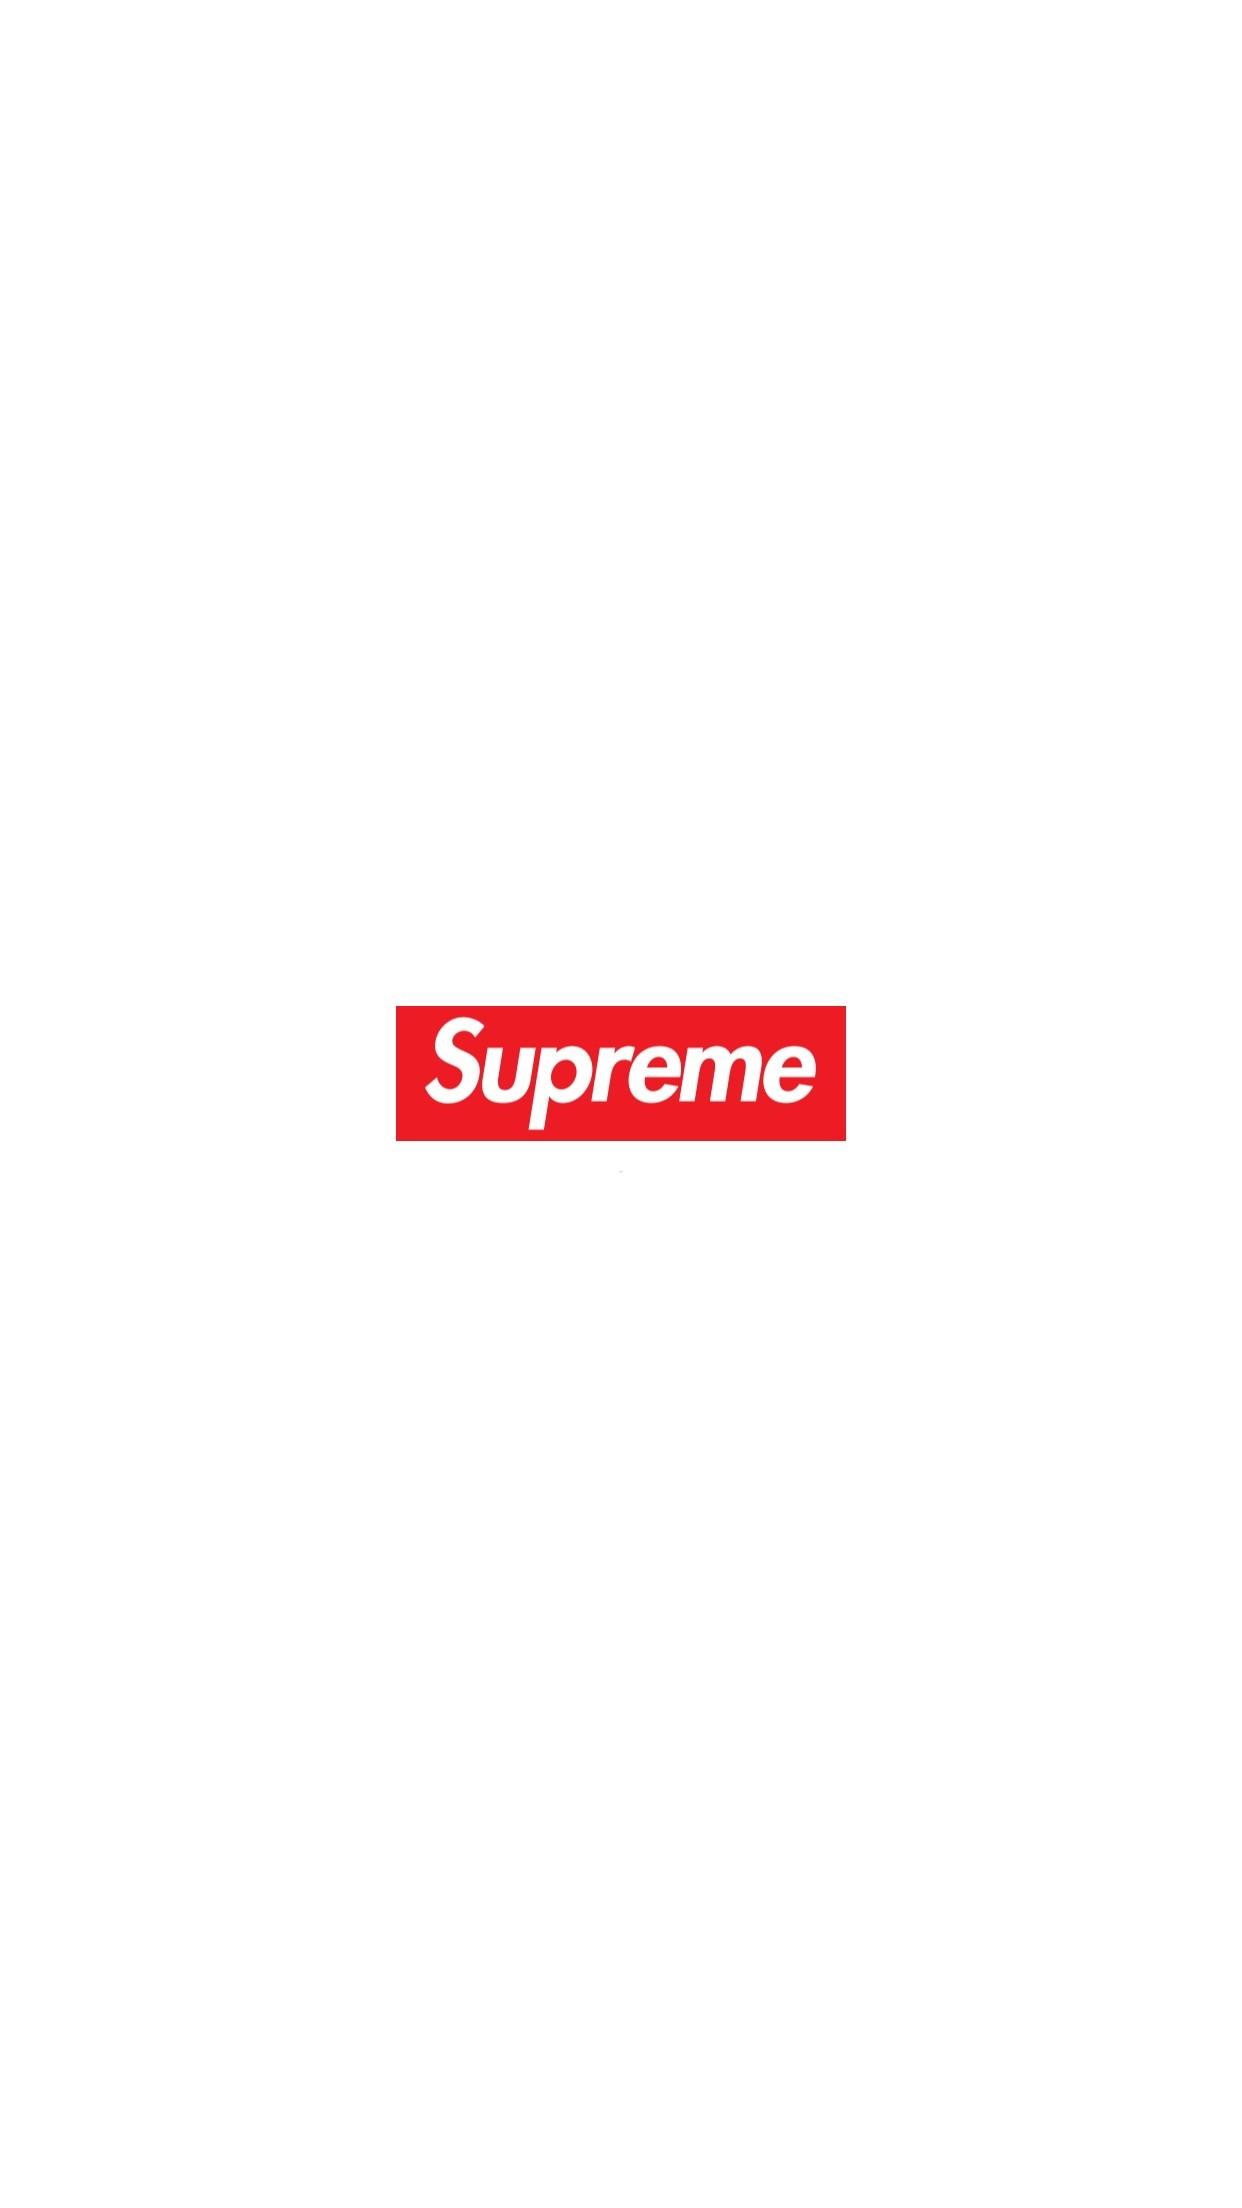 Pin by 真 on Apple Watch  Apple watch wallpaper, Supreme iphone wallpaper,  Apple watch faces